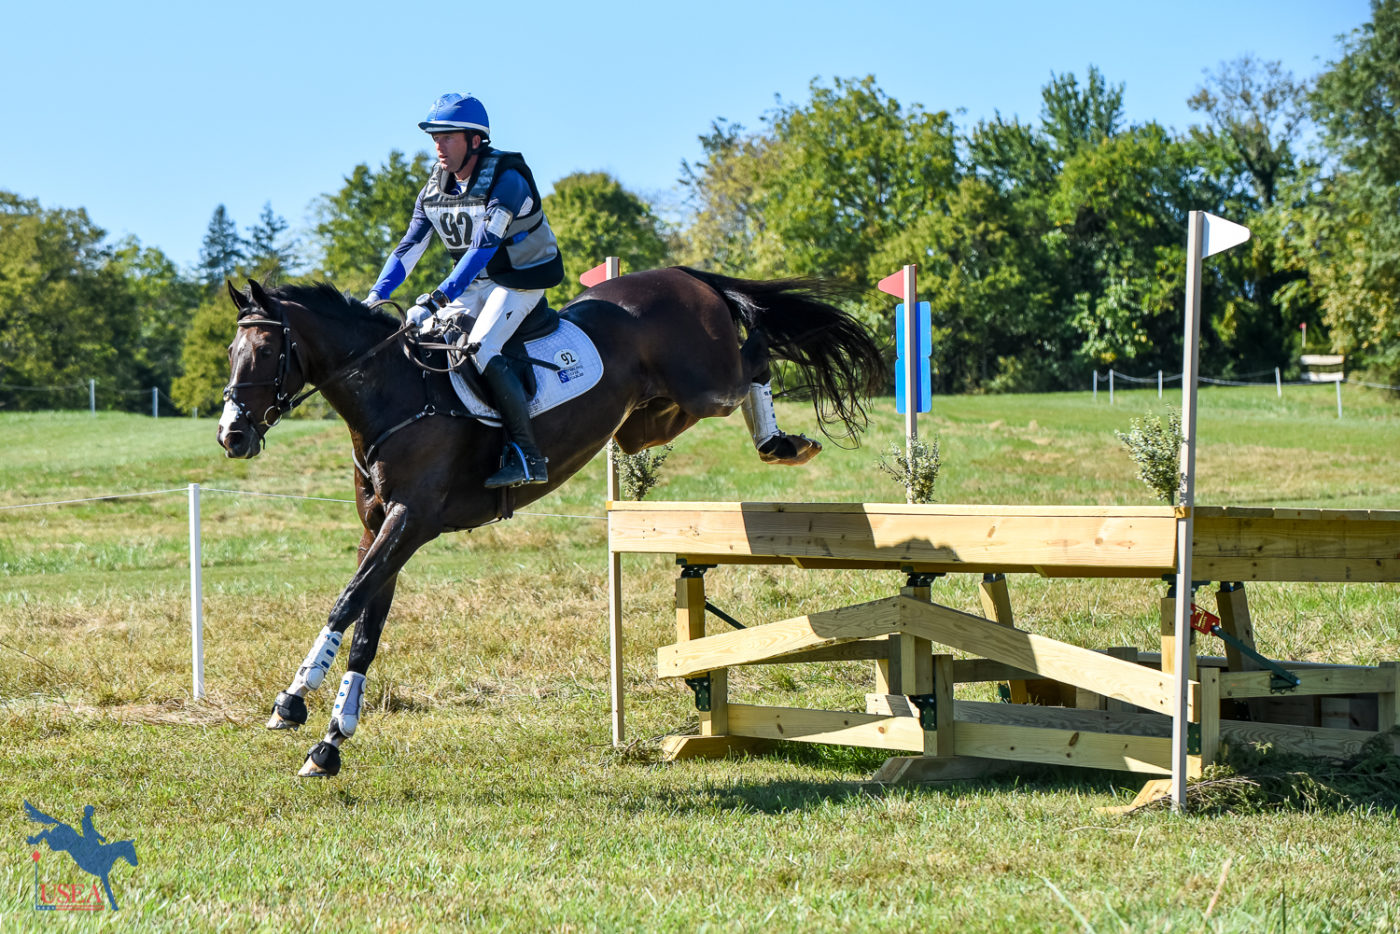 This new frangible table, and many more like it around the country, were constructed thanks to the USEA Foundation Frangible Fund. USEA/Jessica Duffy Photo.